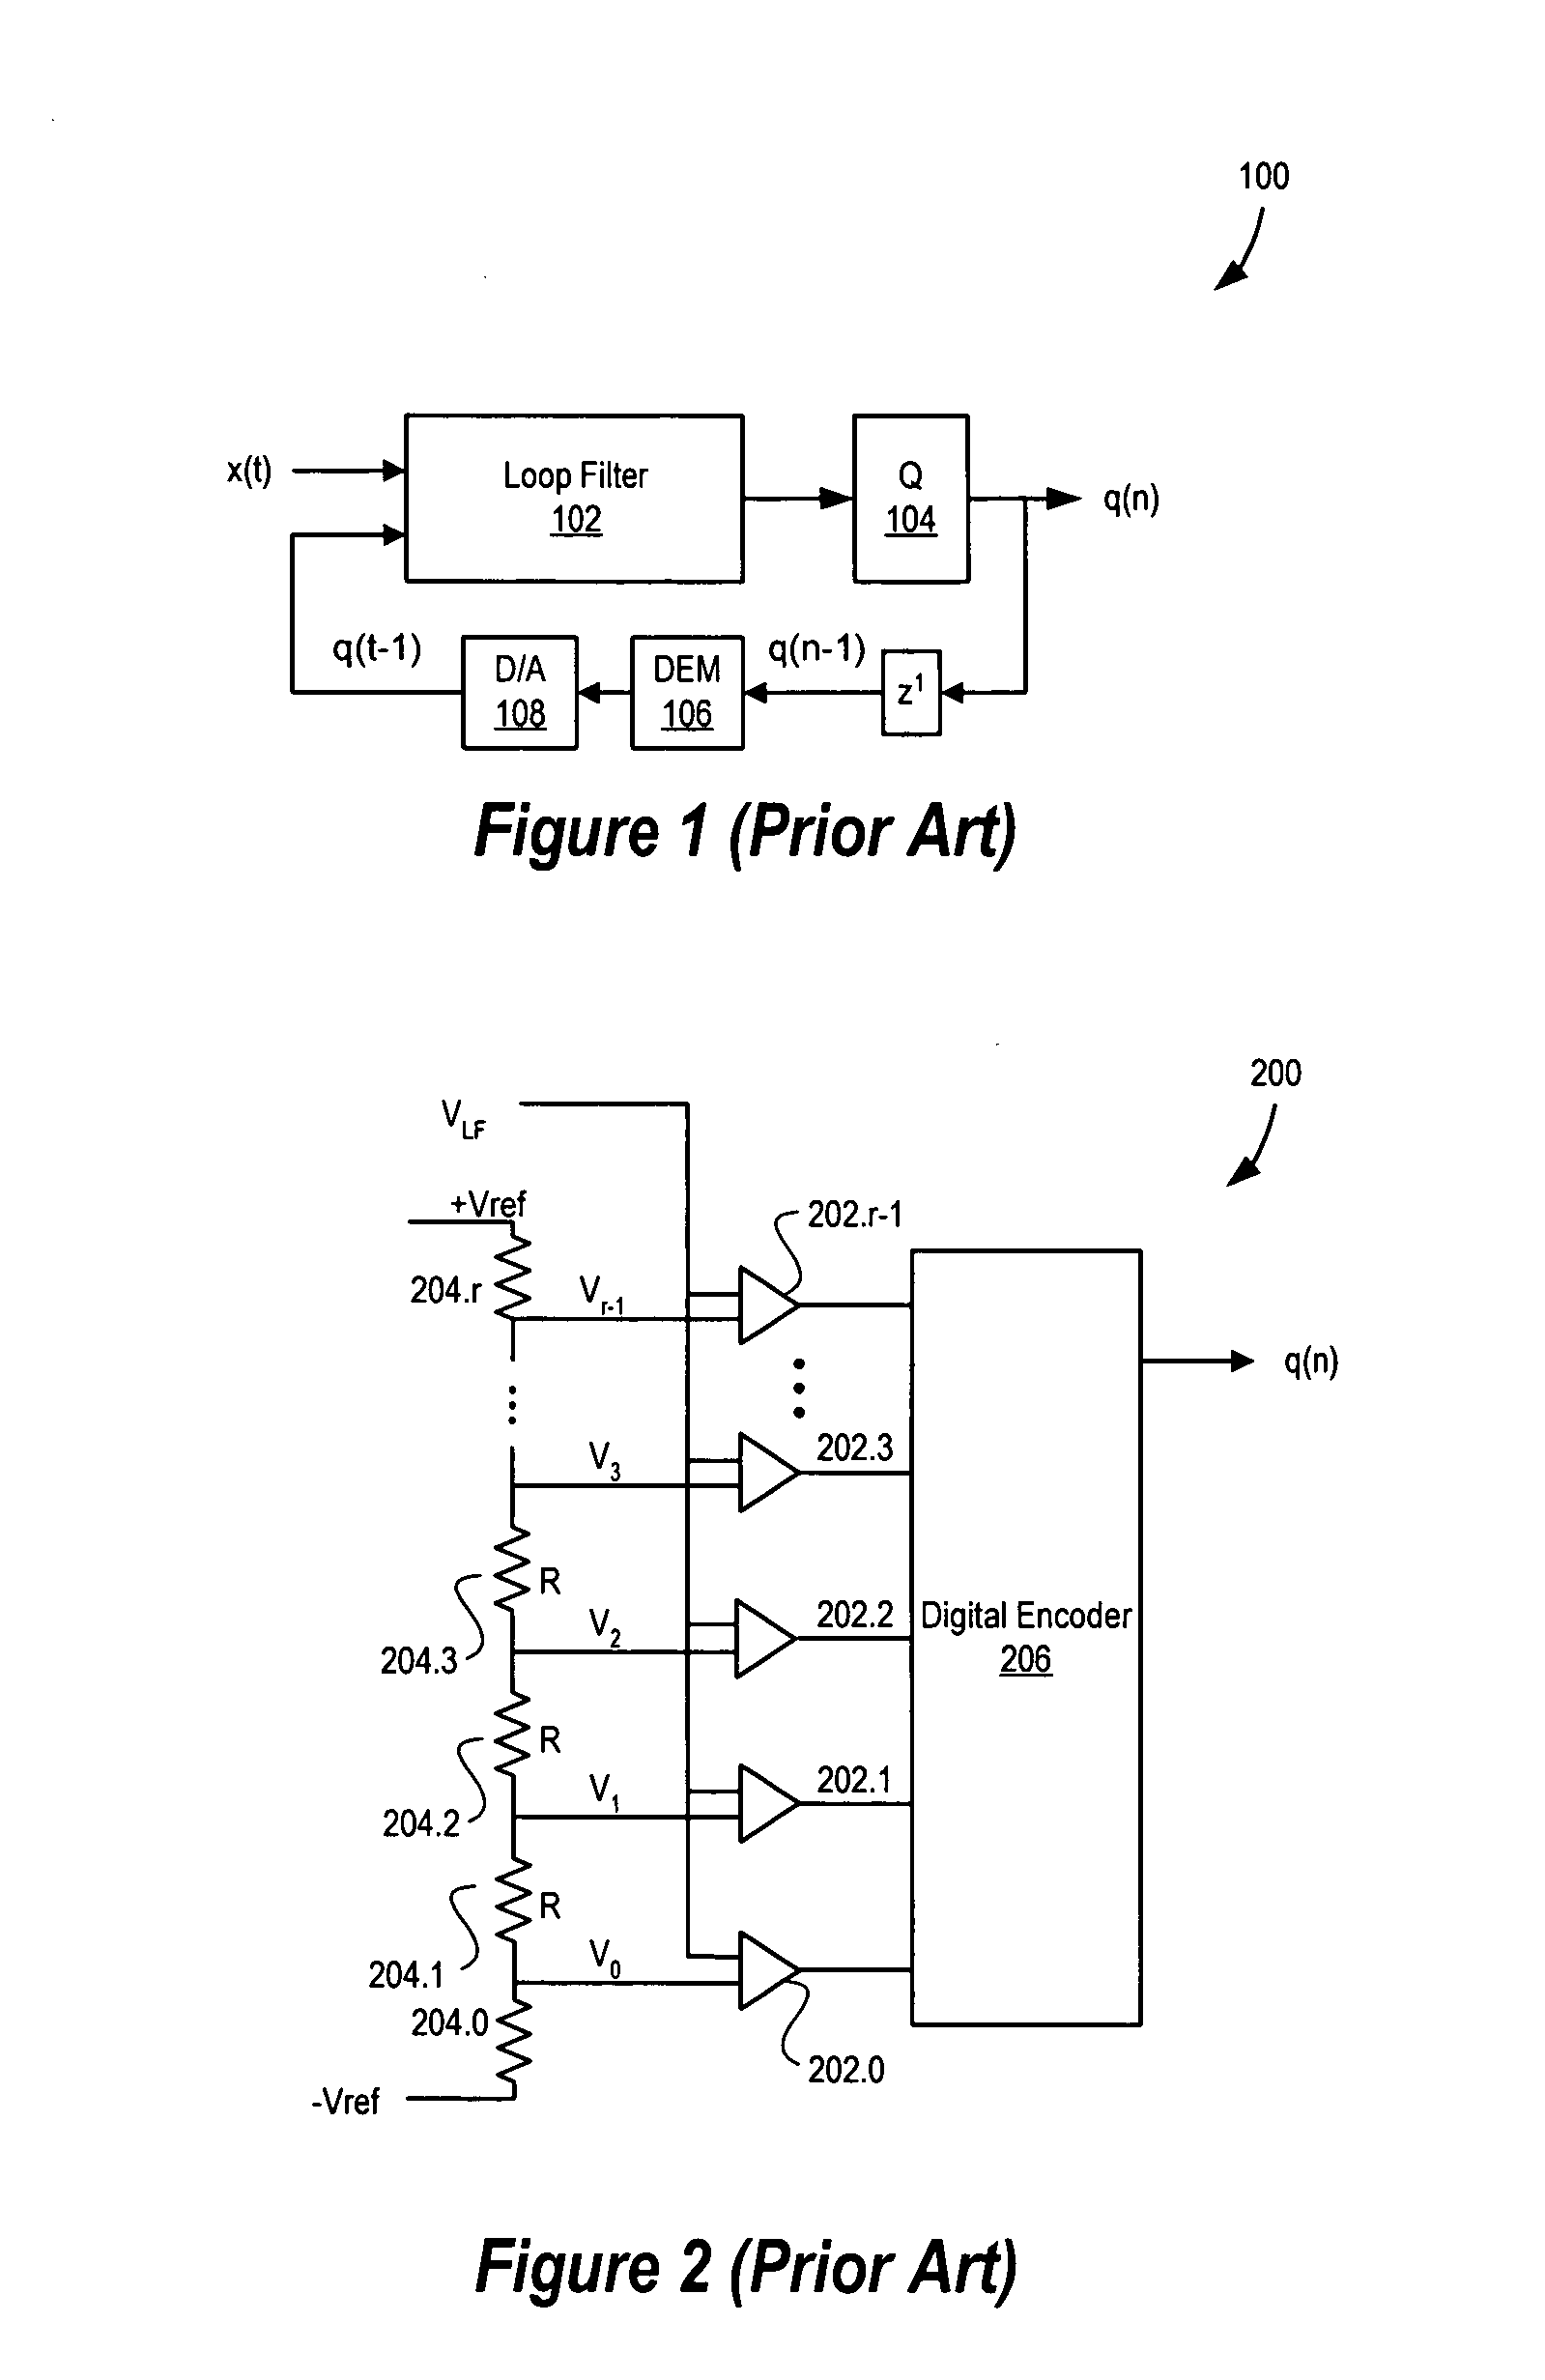 Delta sigma modulator analog-to-digital converters with quantizer output prediction and comparator reduction